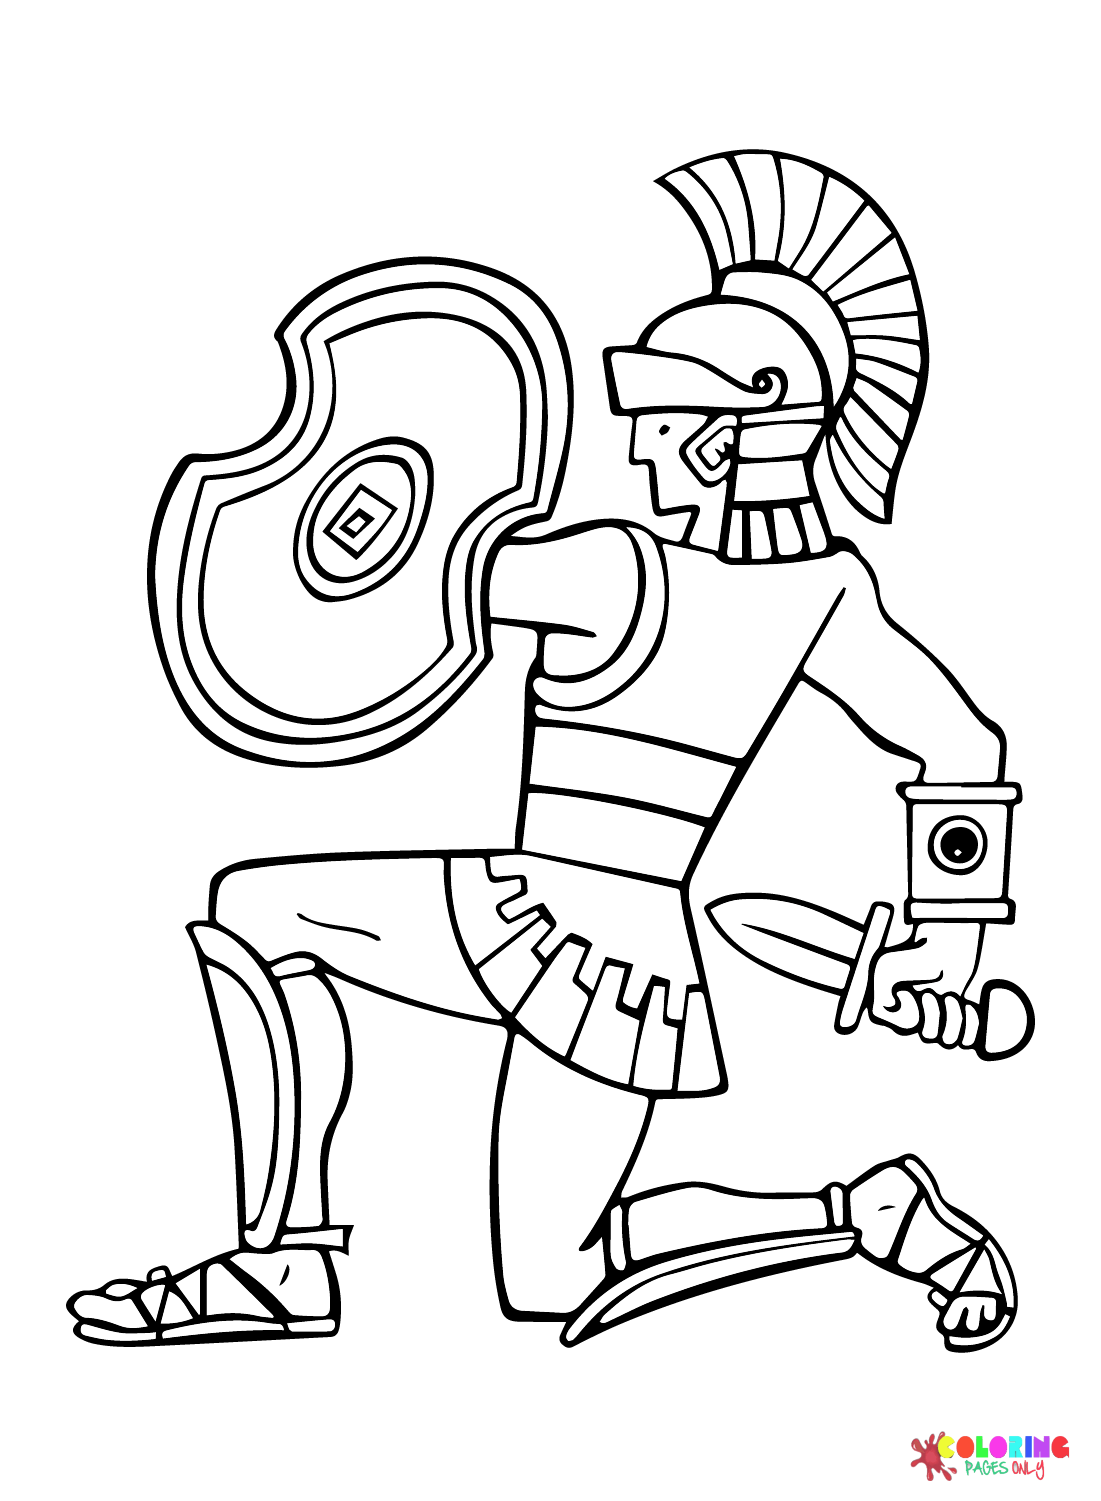 Ancient Rome and Roman Empire Pictures Coloring Page